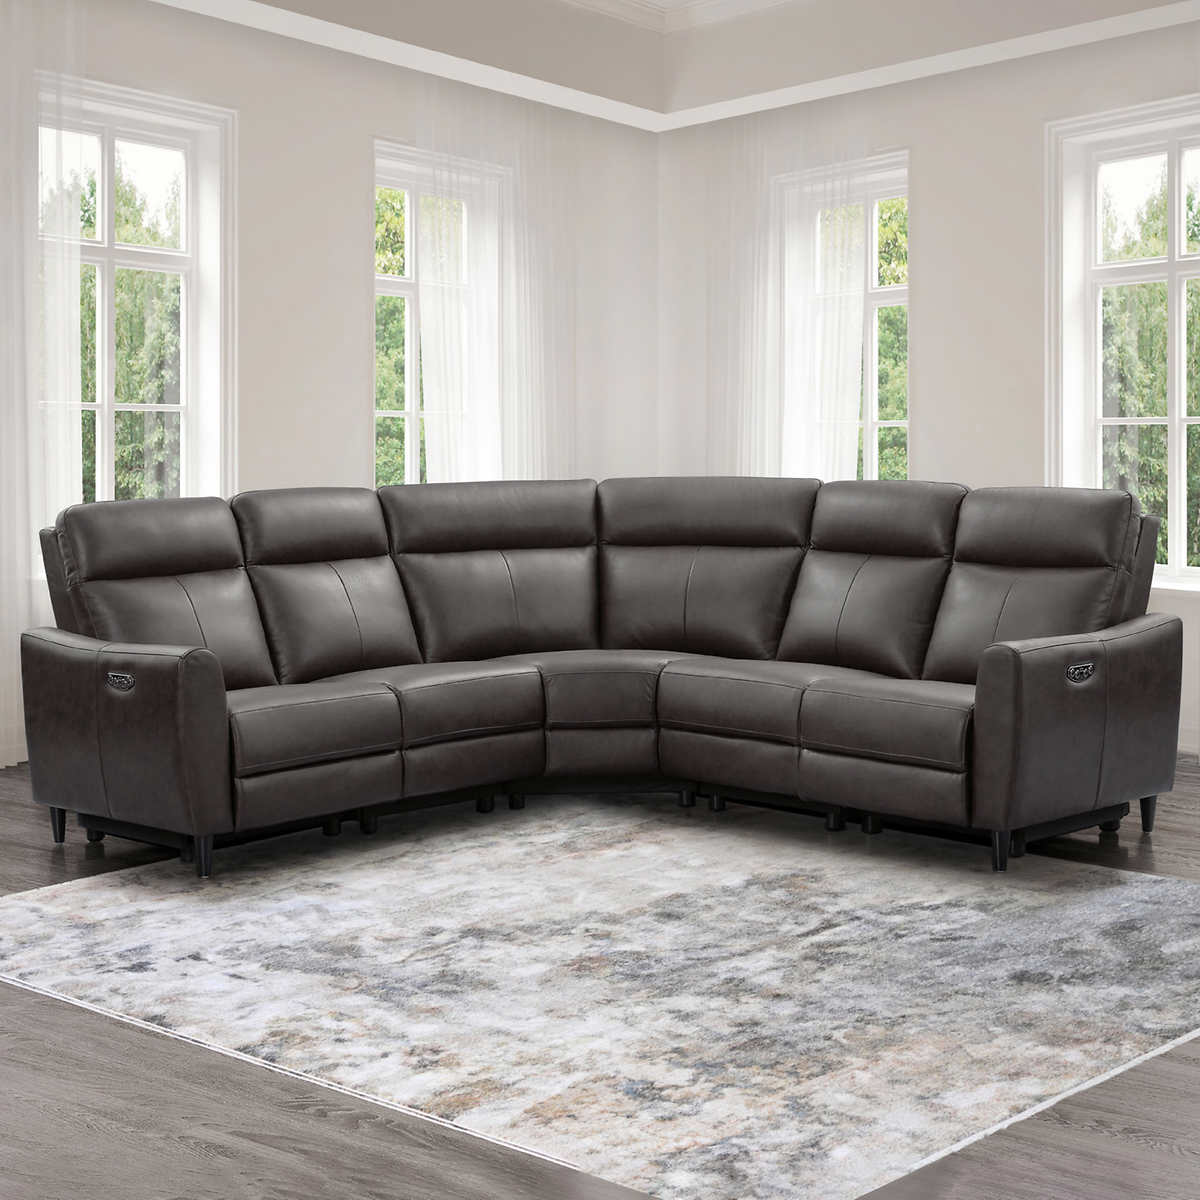 Tomasino Leather Power Reclining, Leather Sectional Costco